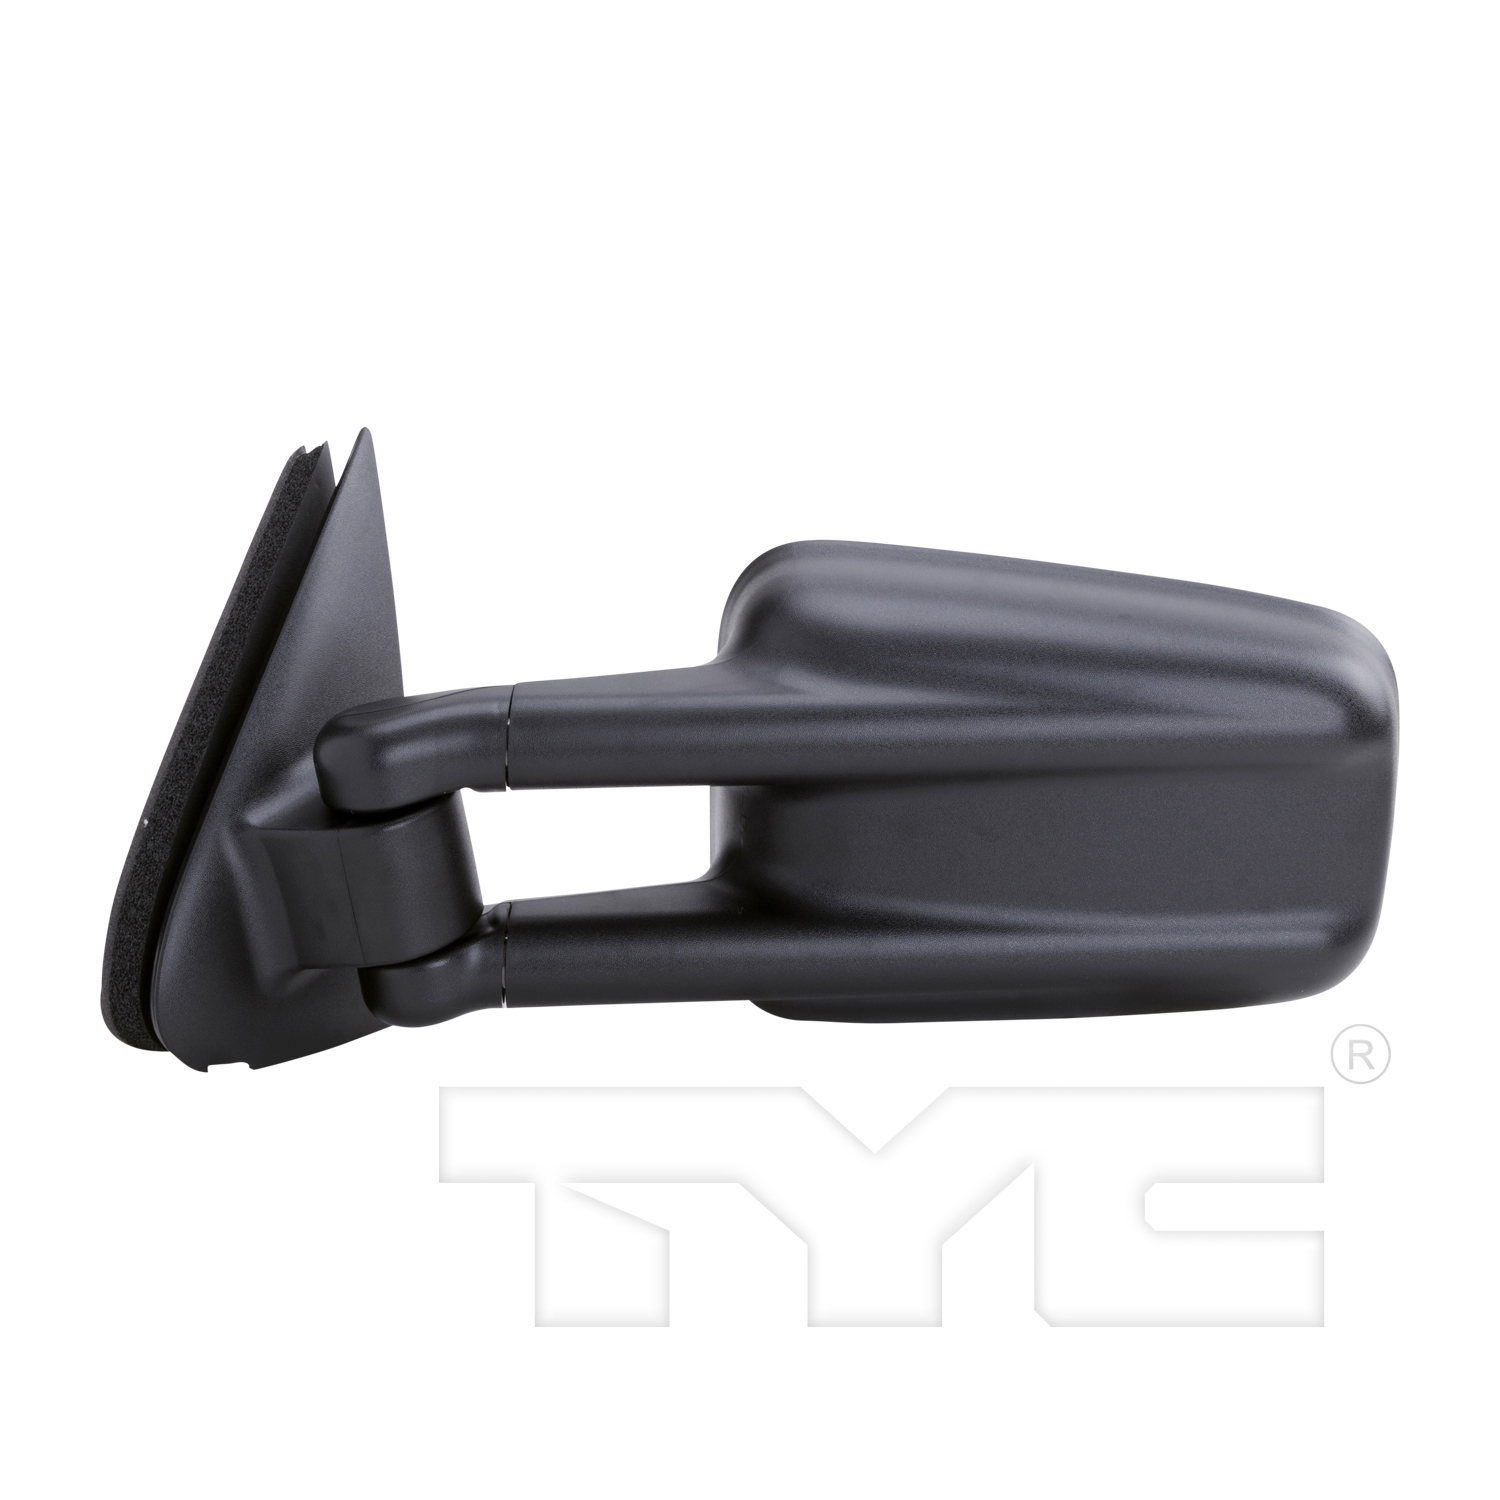 Aftermarket MIRRORS for CHEVROLET - TAHOE, TAHOE,00-06,LT Mirror outside rear view